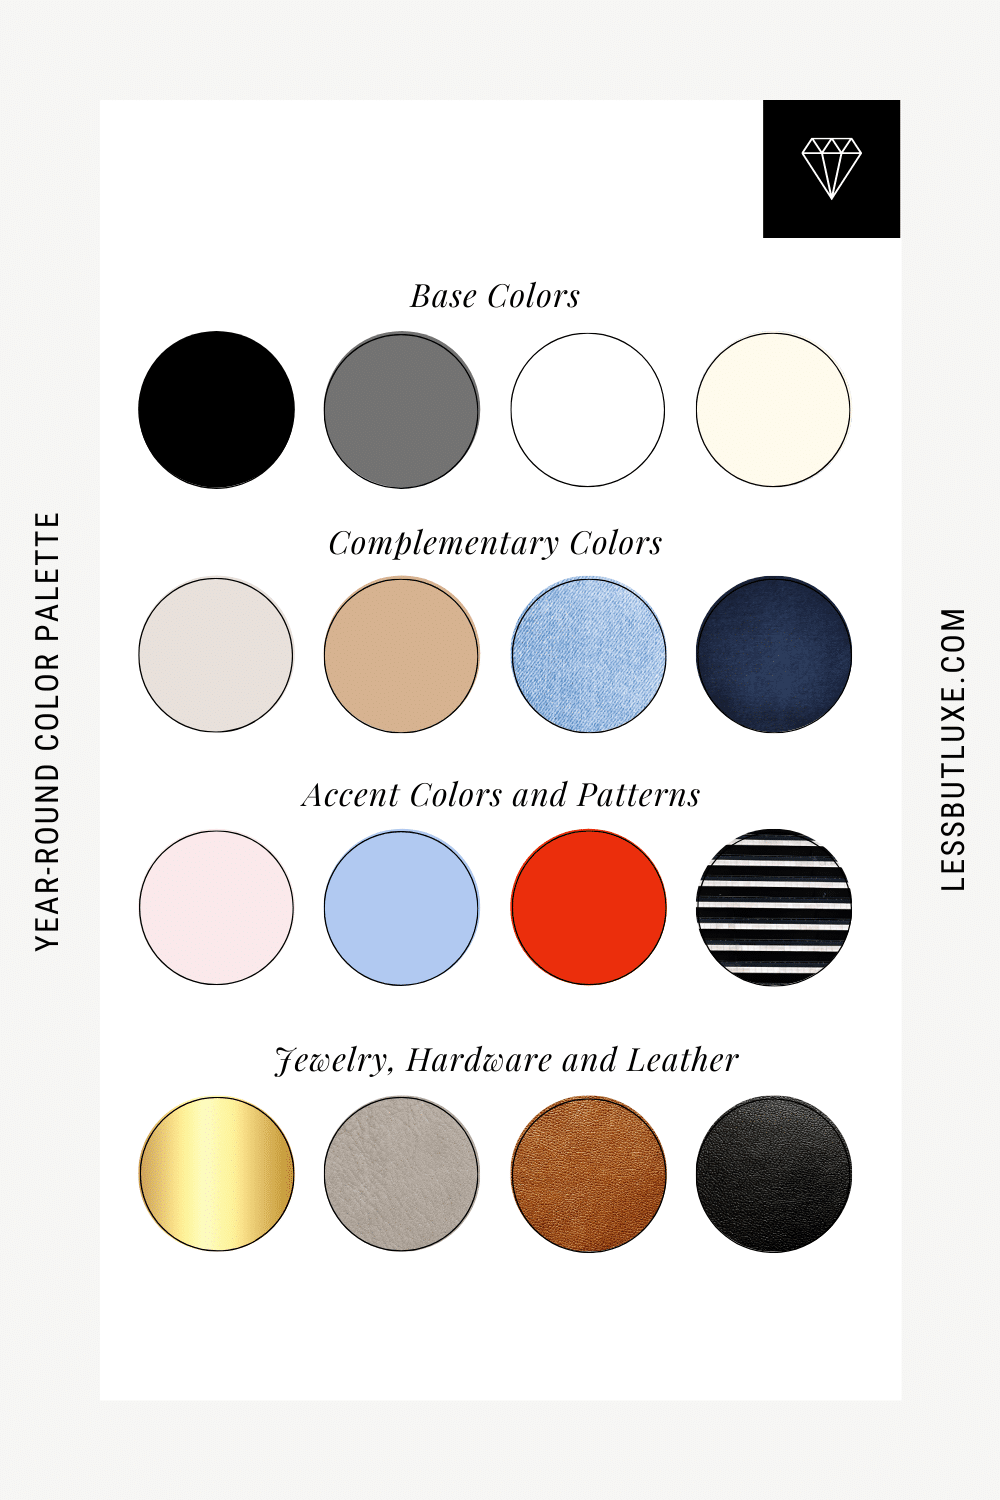 Year-Round Color Palette